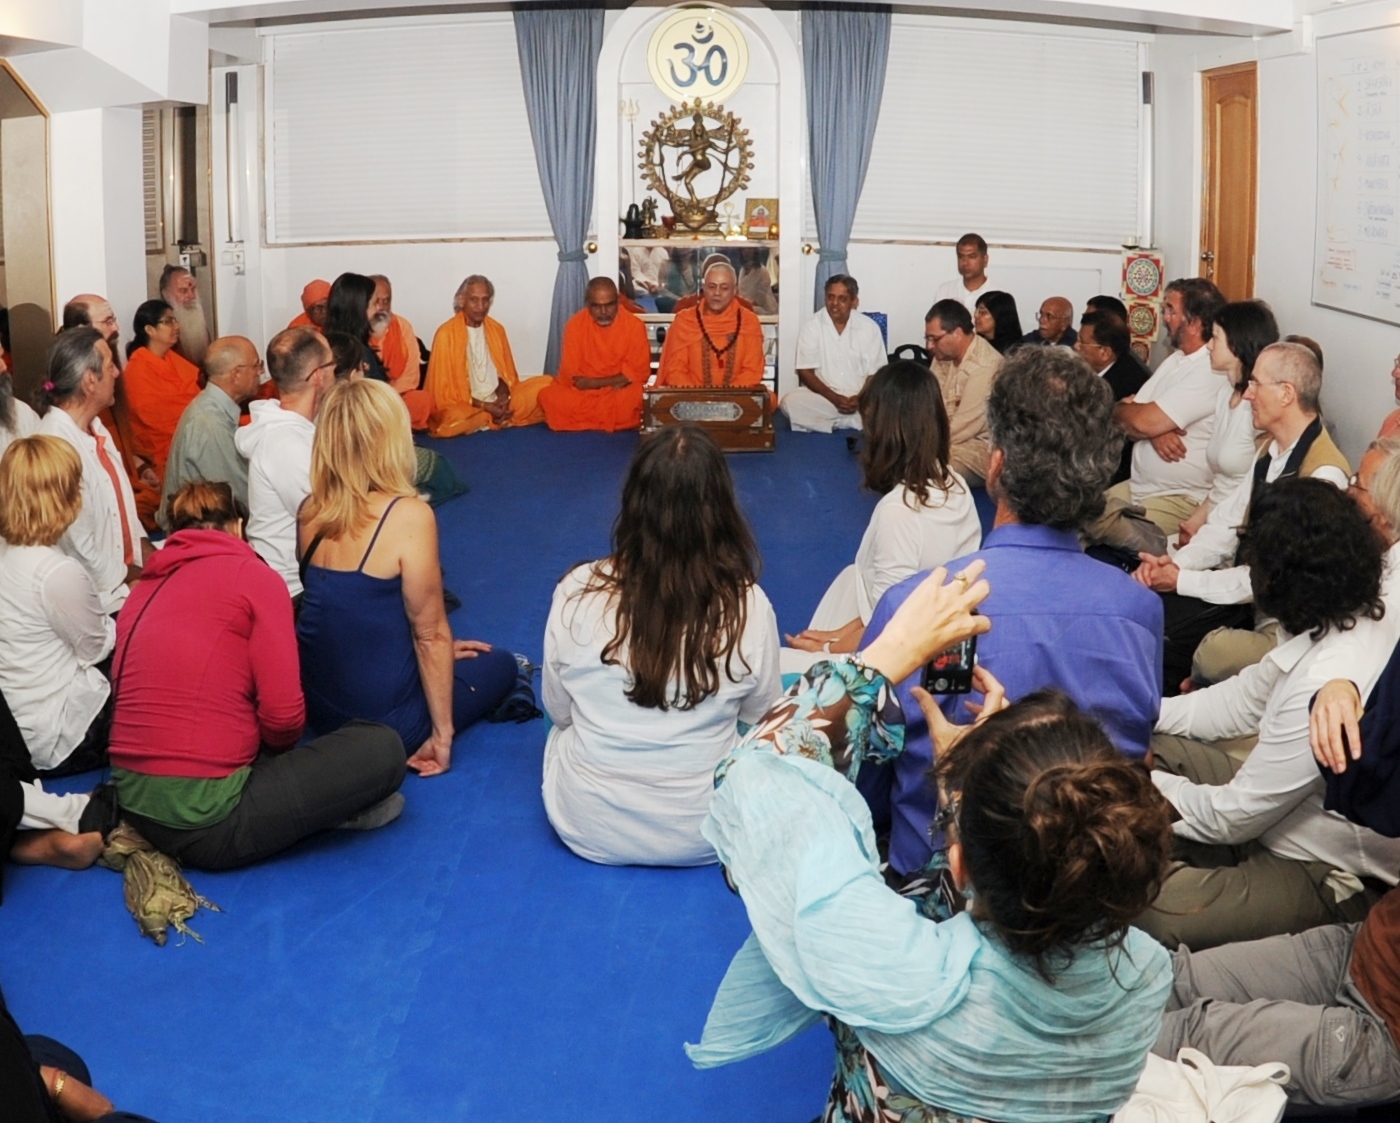 Reception of the Invited Masters to the International Day of Yoga at the Headquarters of the Portuguese Yoga Confederation, Lisboa – 2013